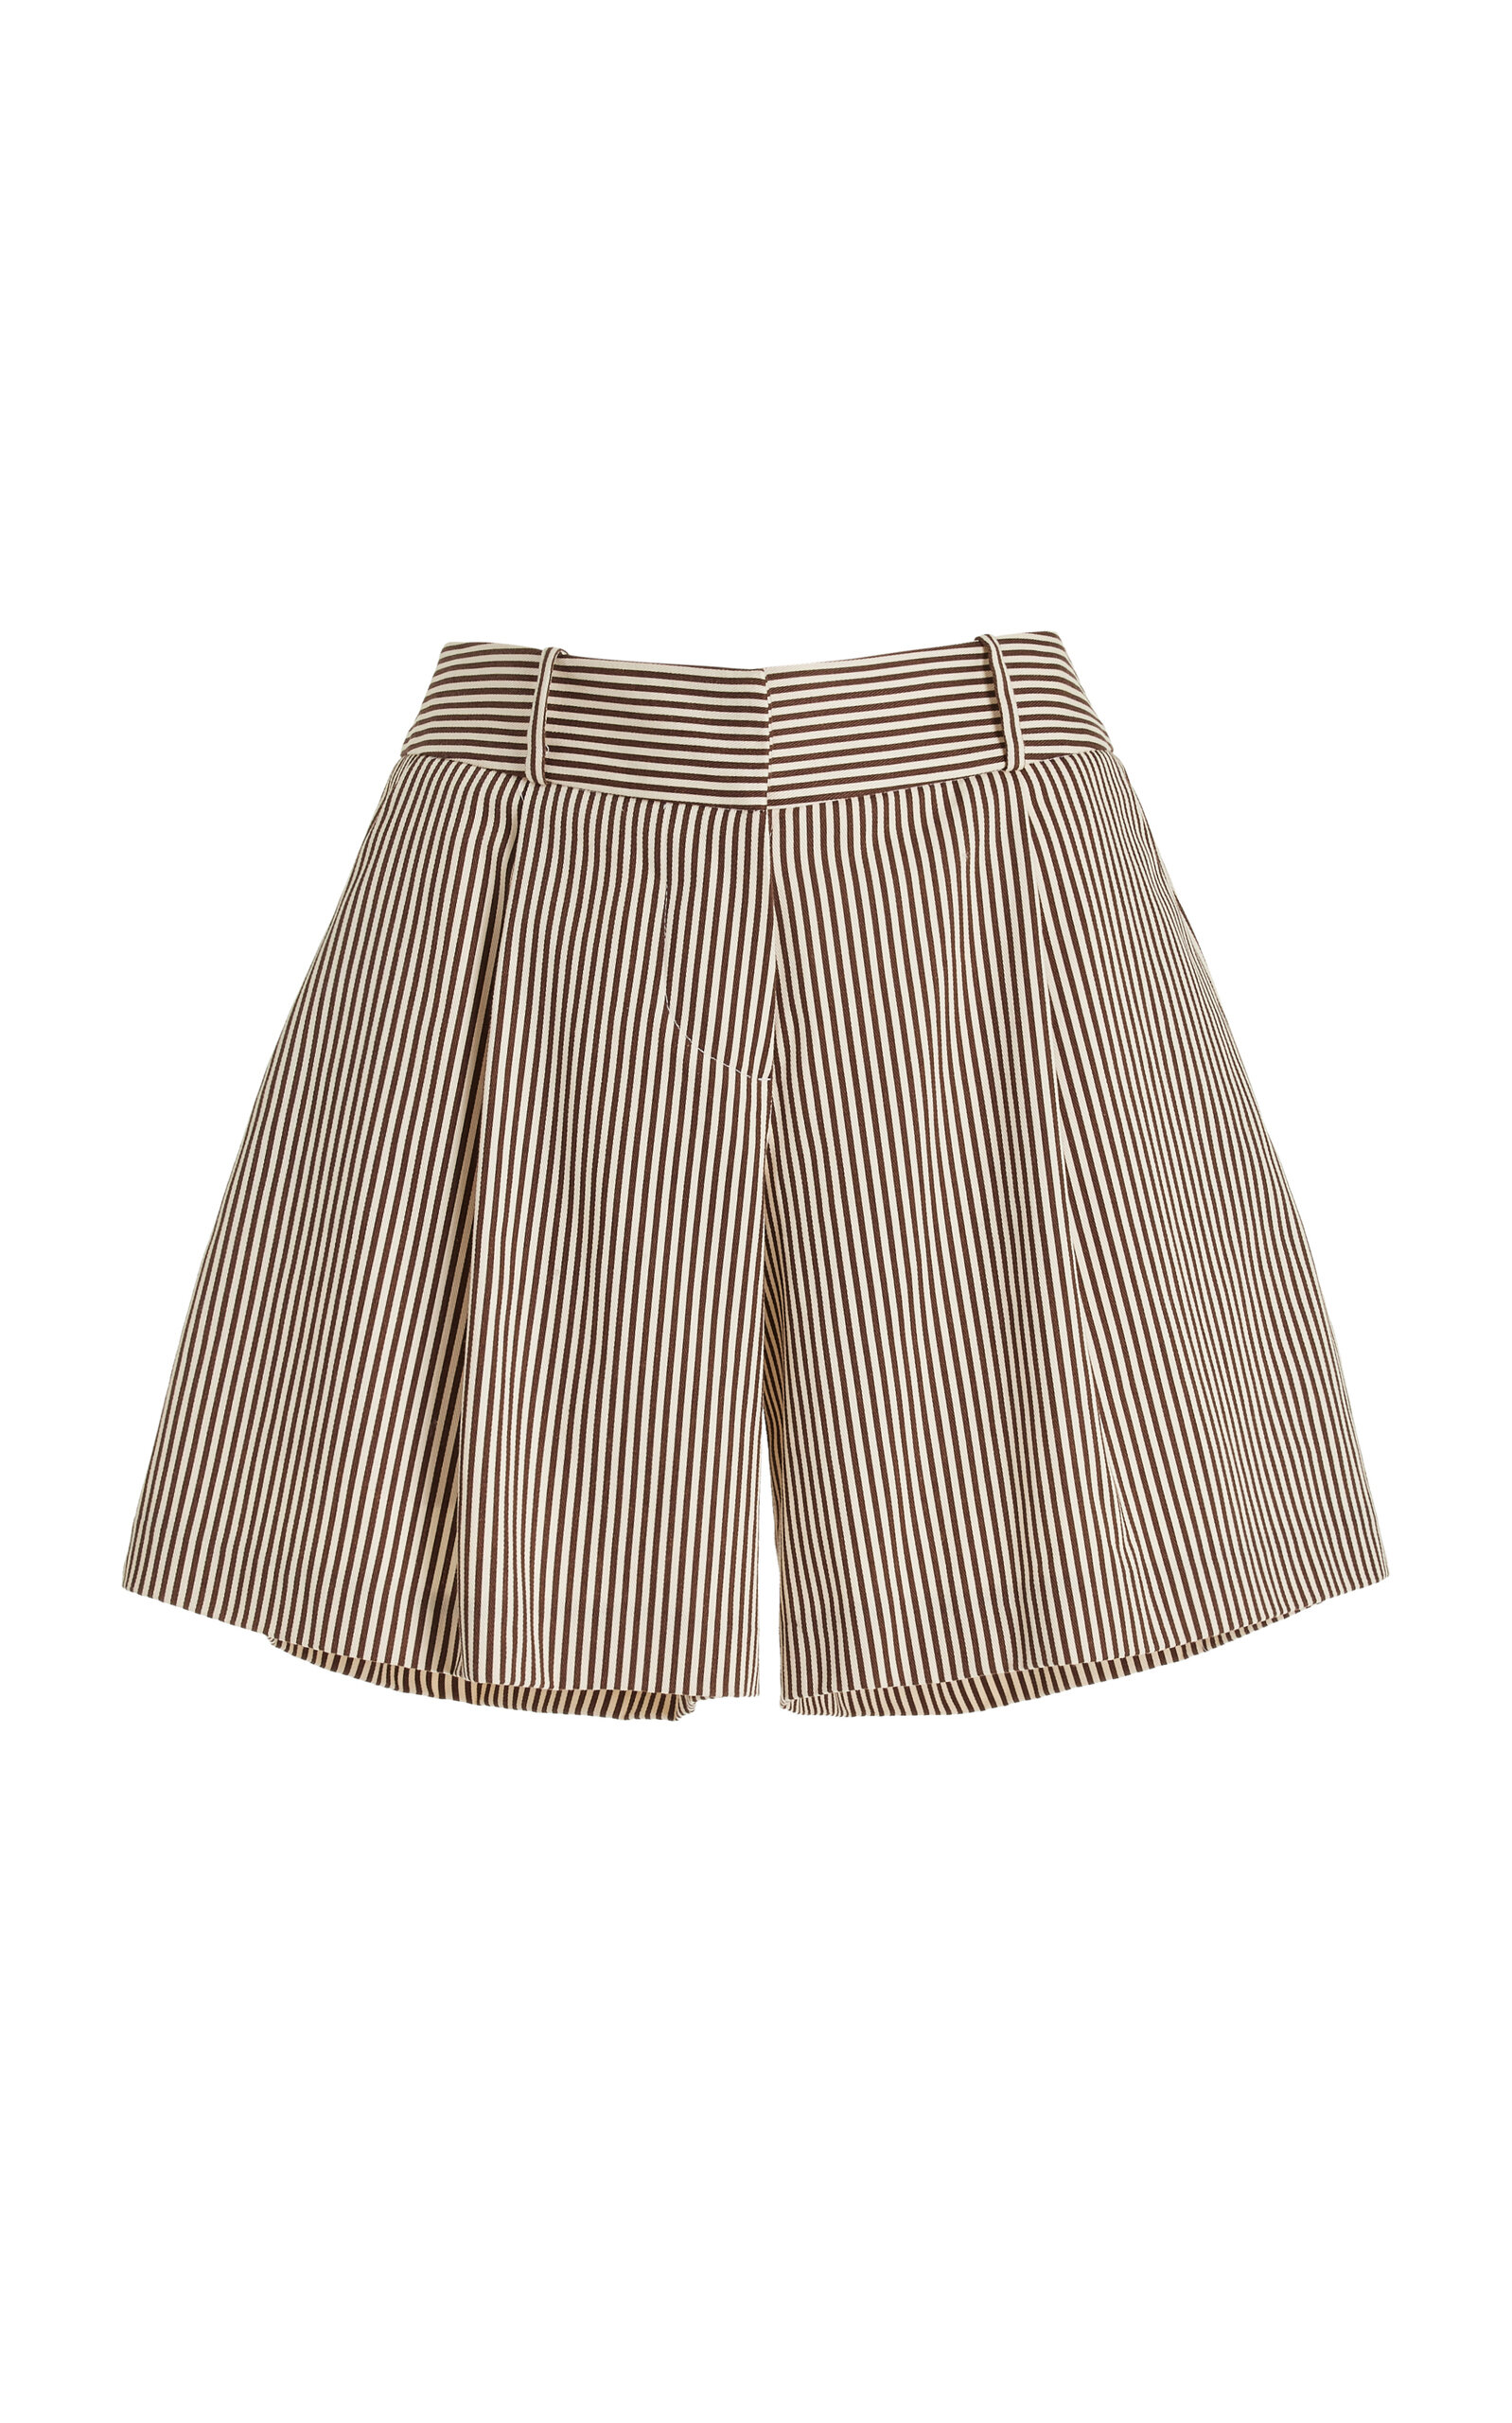 The Essie Pleated Cotton Twill Shorts